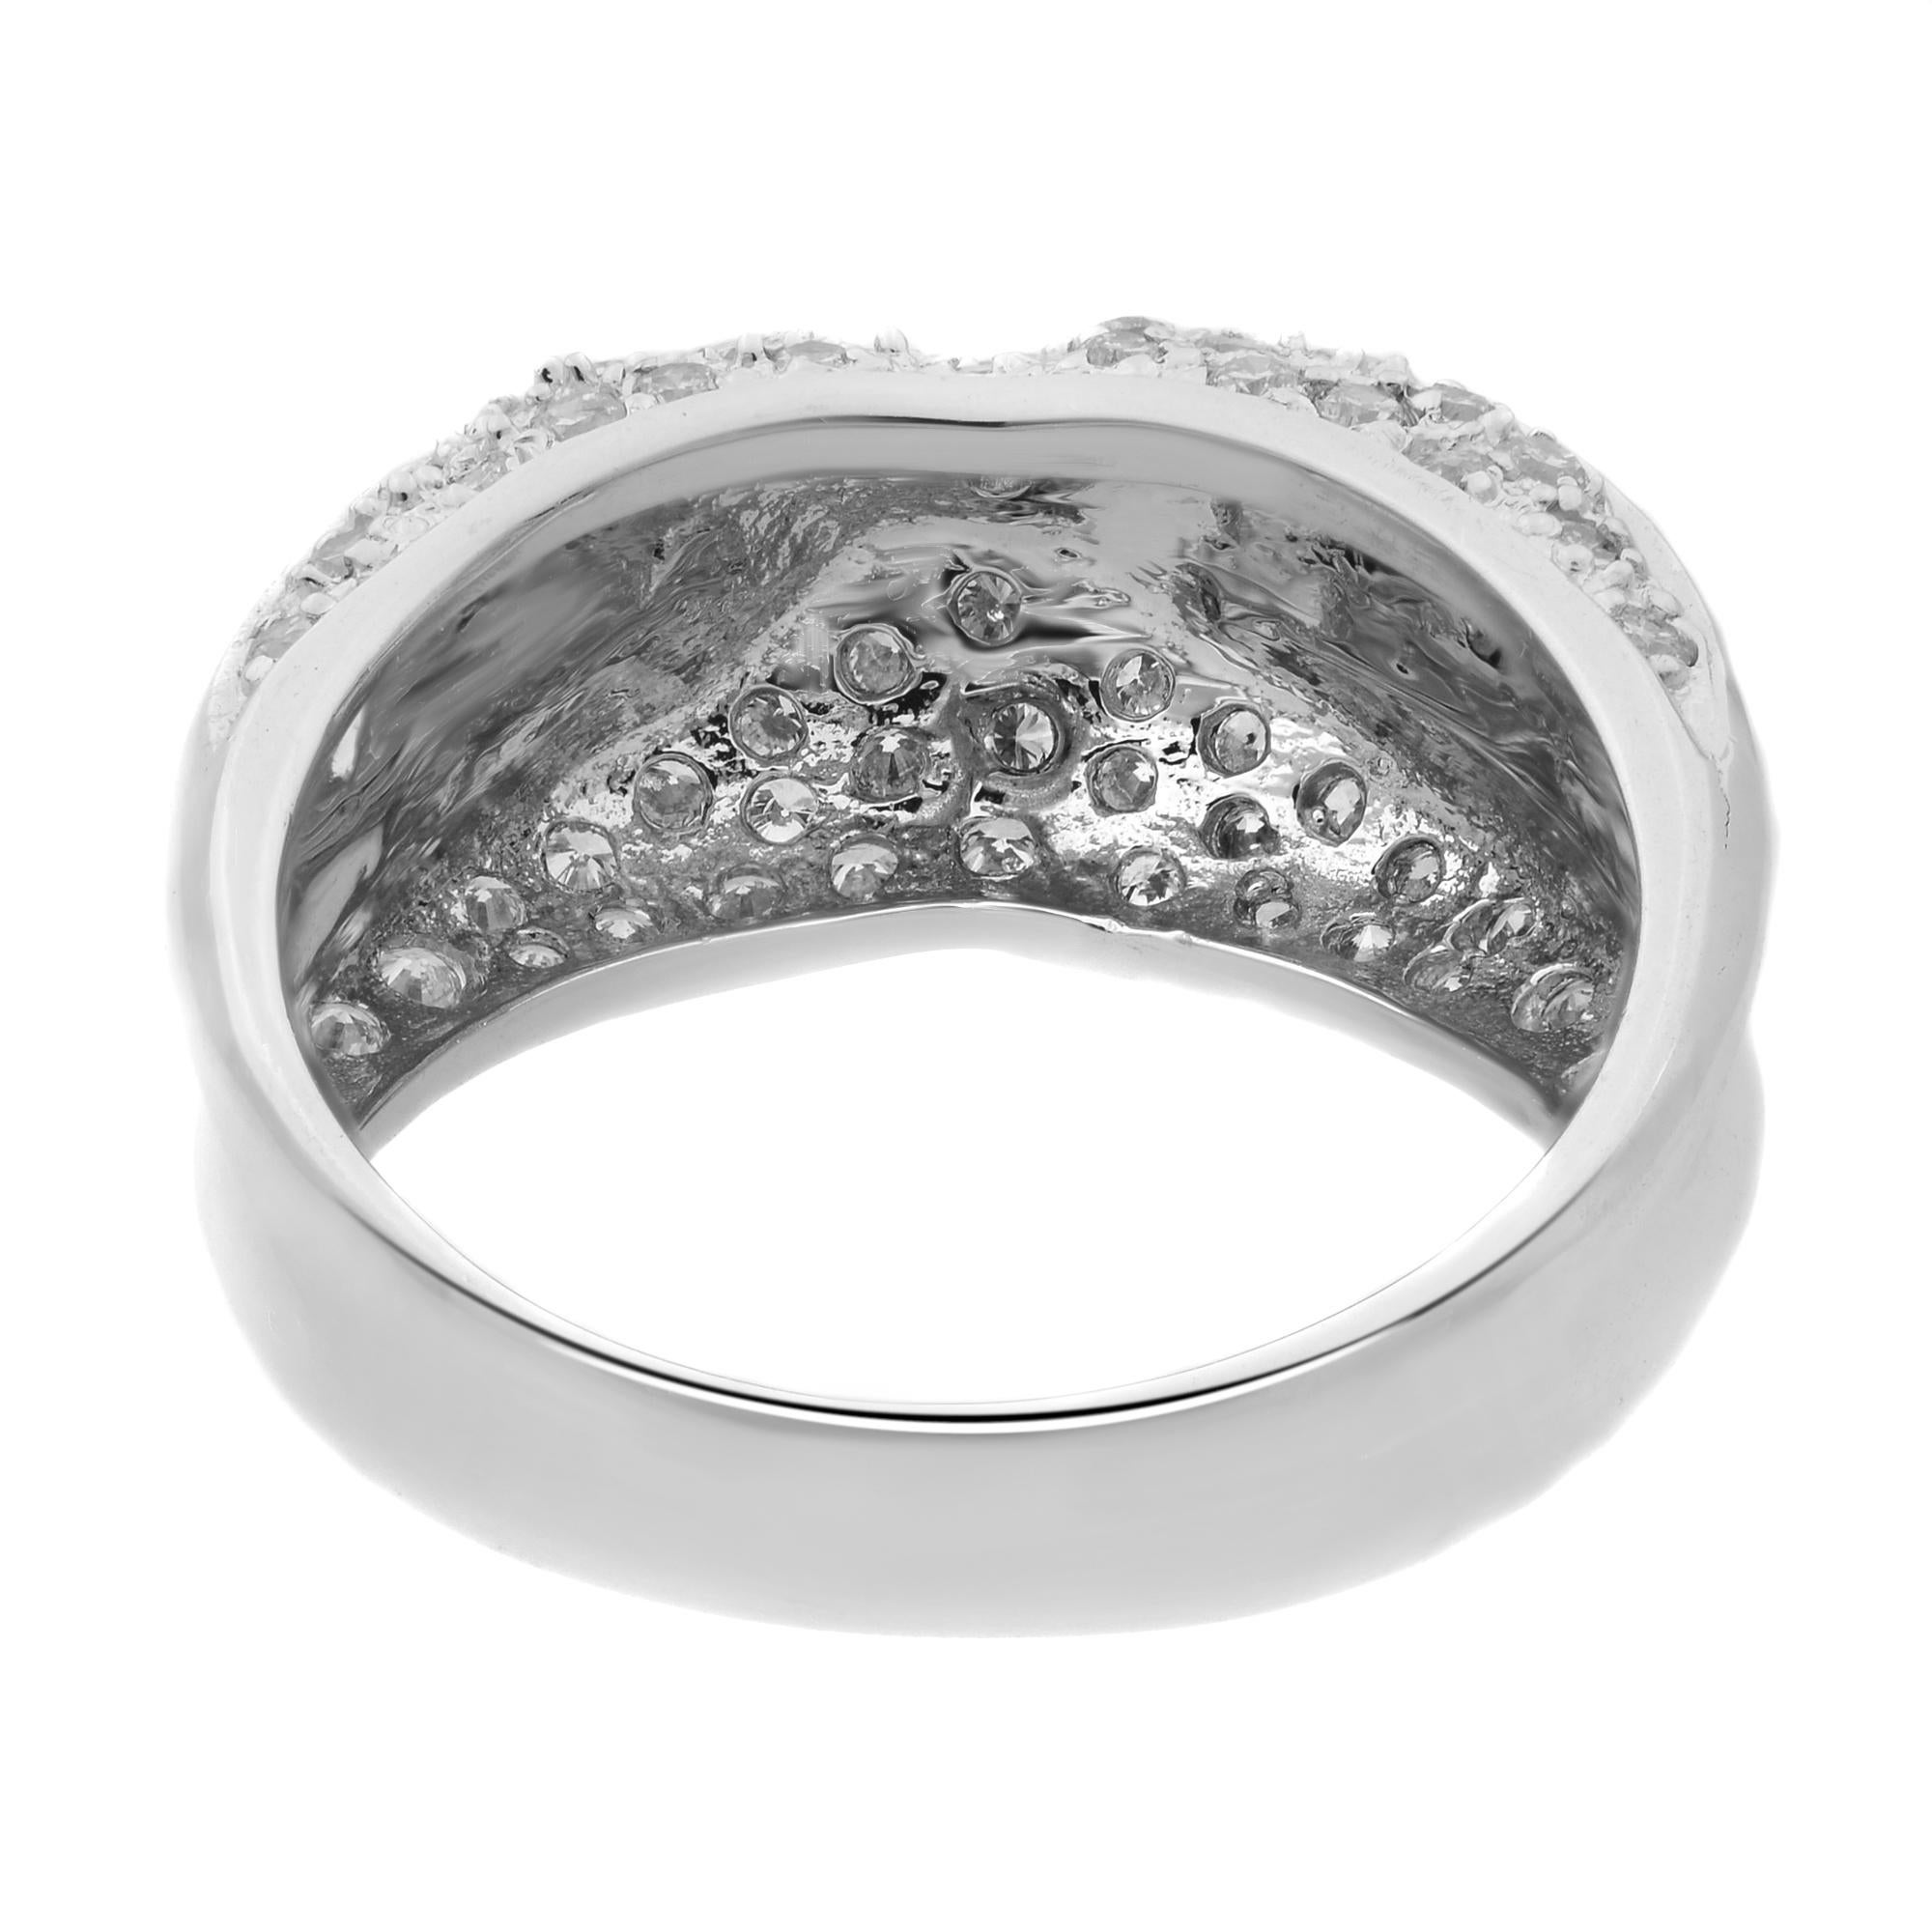 Rachel Koen 0.60Cttw Pave Set Round Diamond Ladies Ring 18K White Gold In Excellent Condition For Sale In New York, NY